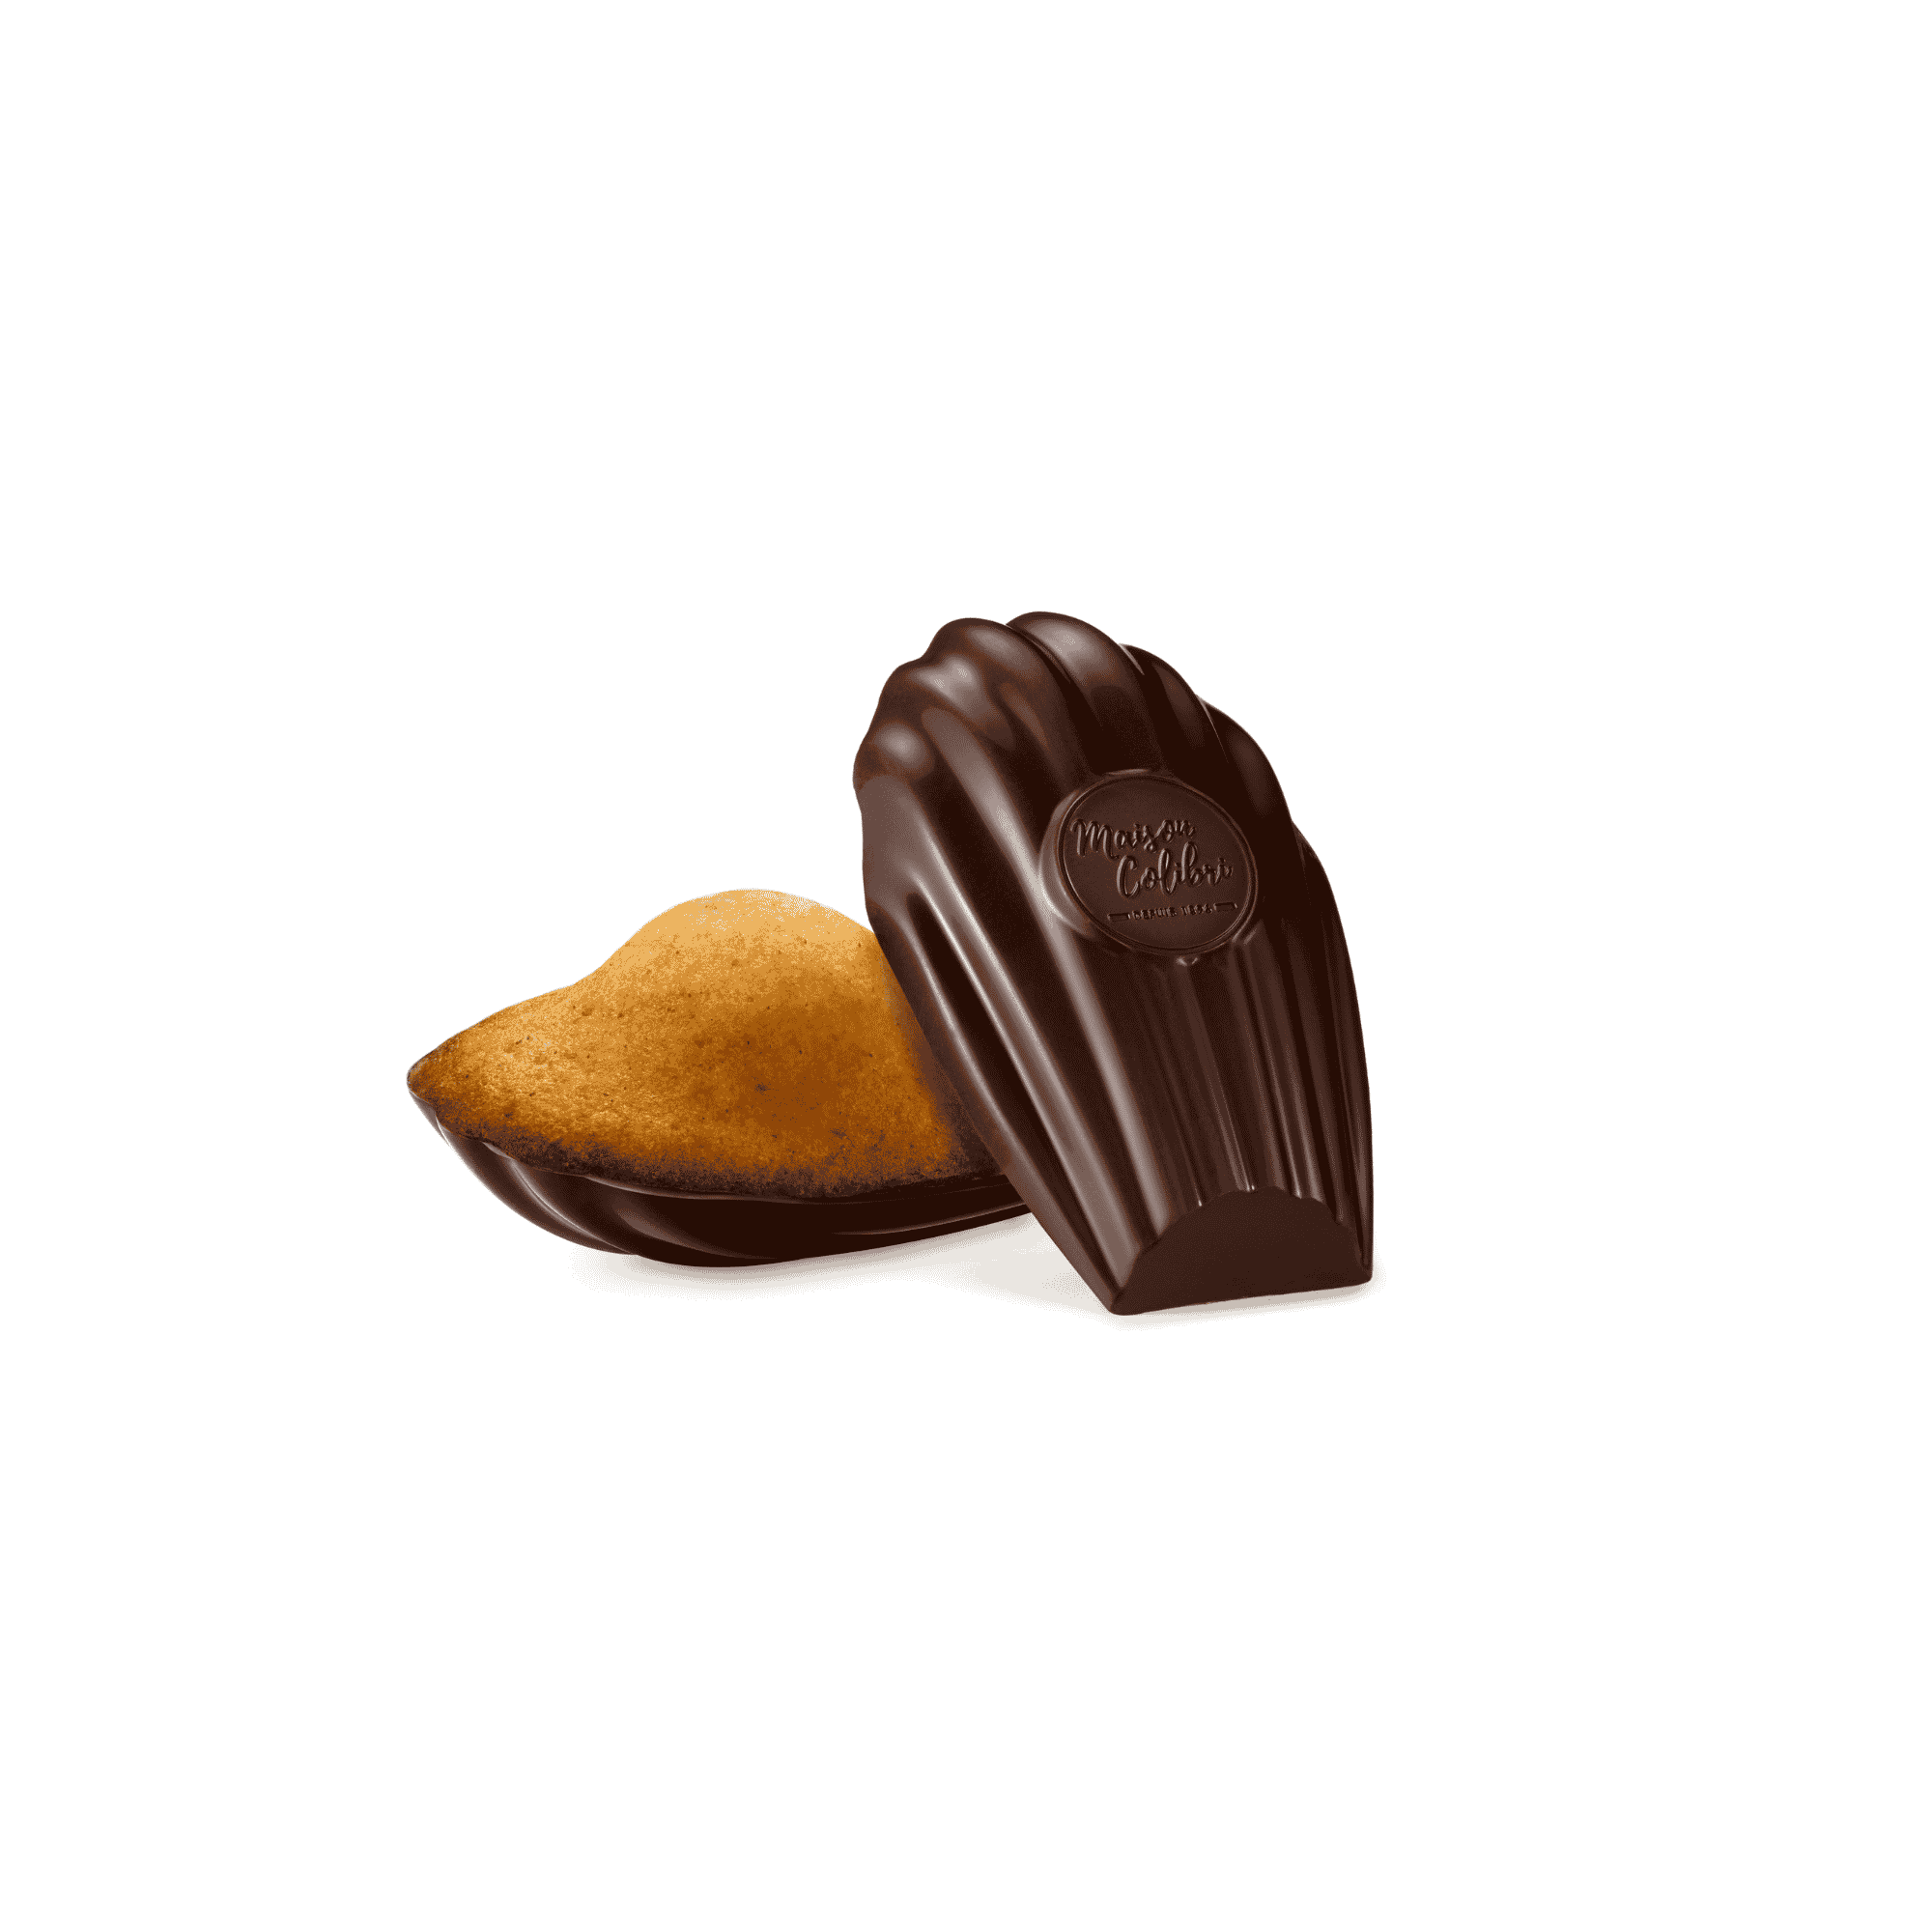 Maison Colibri - Les madeleines personnalisables Made in France